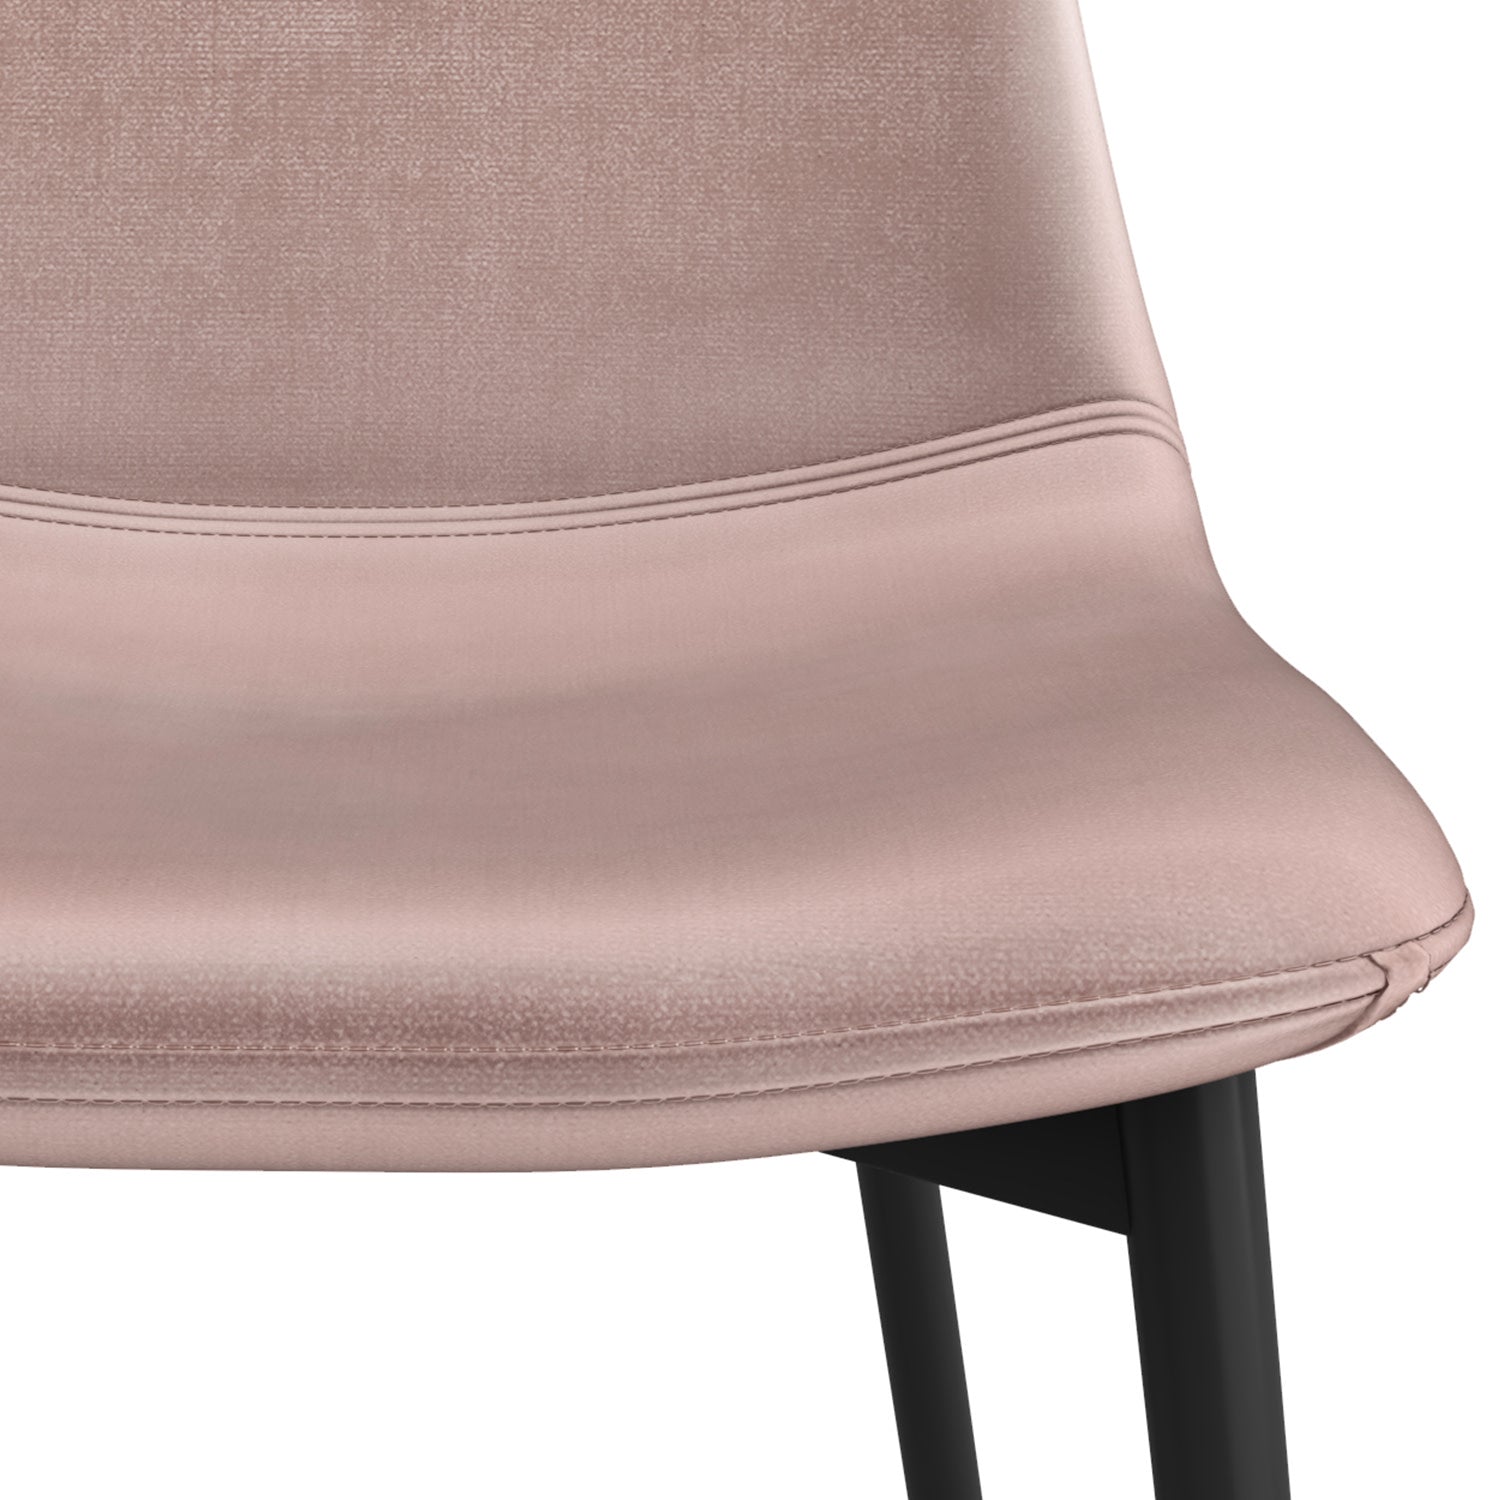 Rose Linen Style Fabric | Alpine Dining Chair (Set of 2)